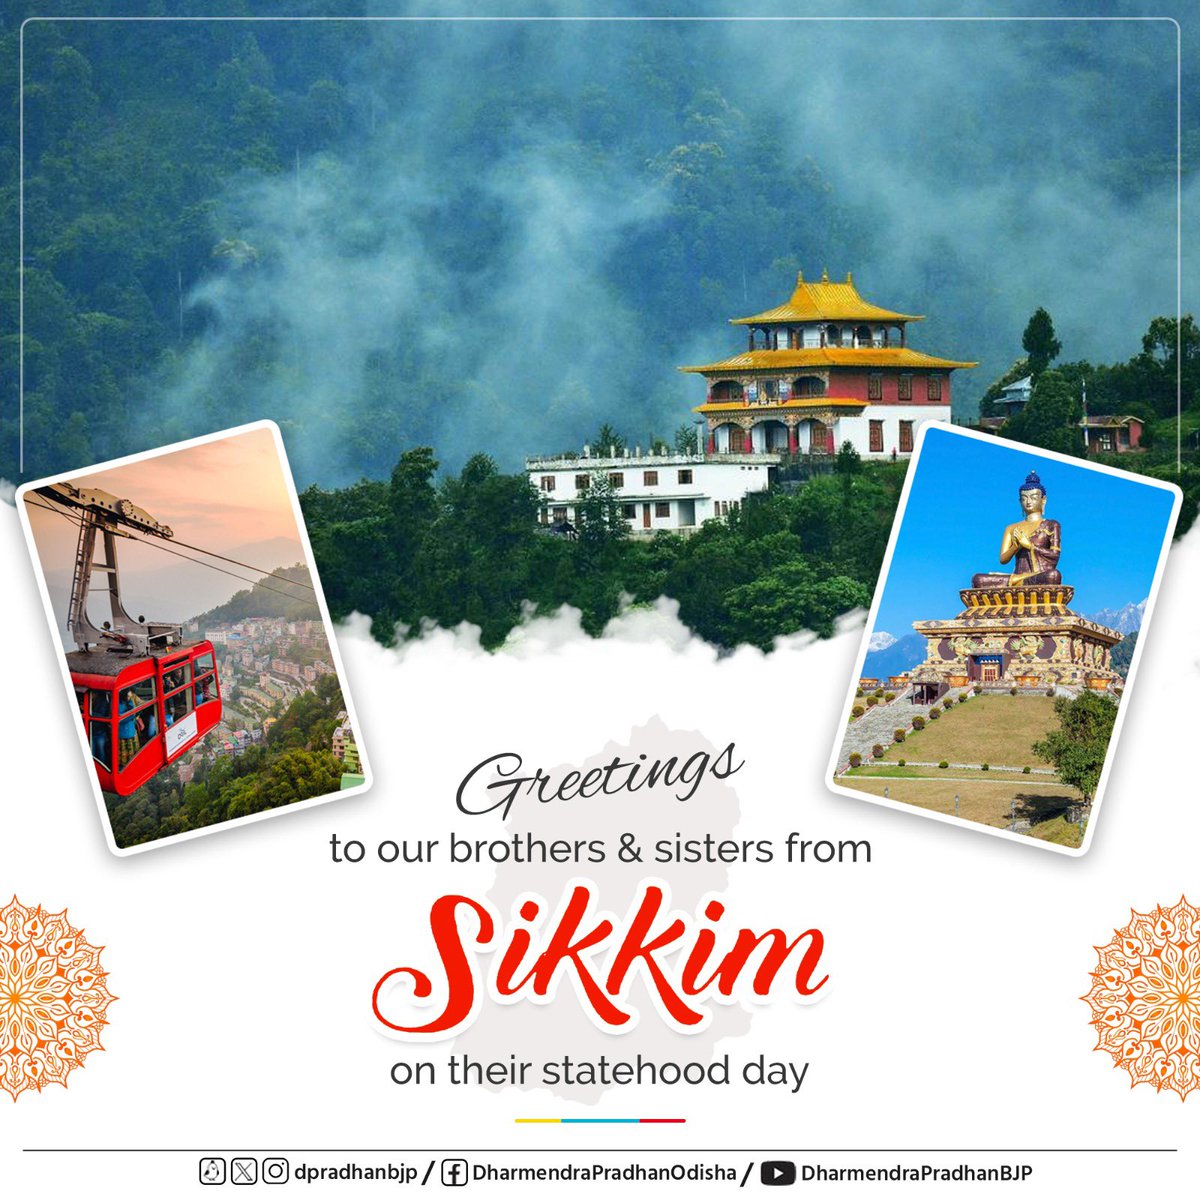 Greetings to the wonderful people of Sikkim on their Statehood Day. The state captivates hearts with its breathtaking landscapes, colourful culture and warm hospitality. Sikkim is also an exemplar of sustainable development. May Sikkim continue to scale new heights of progress.